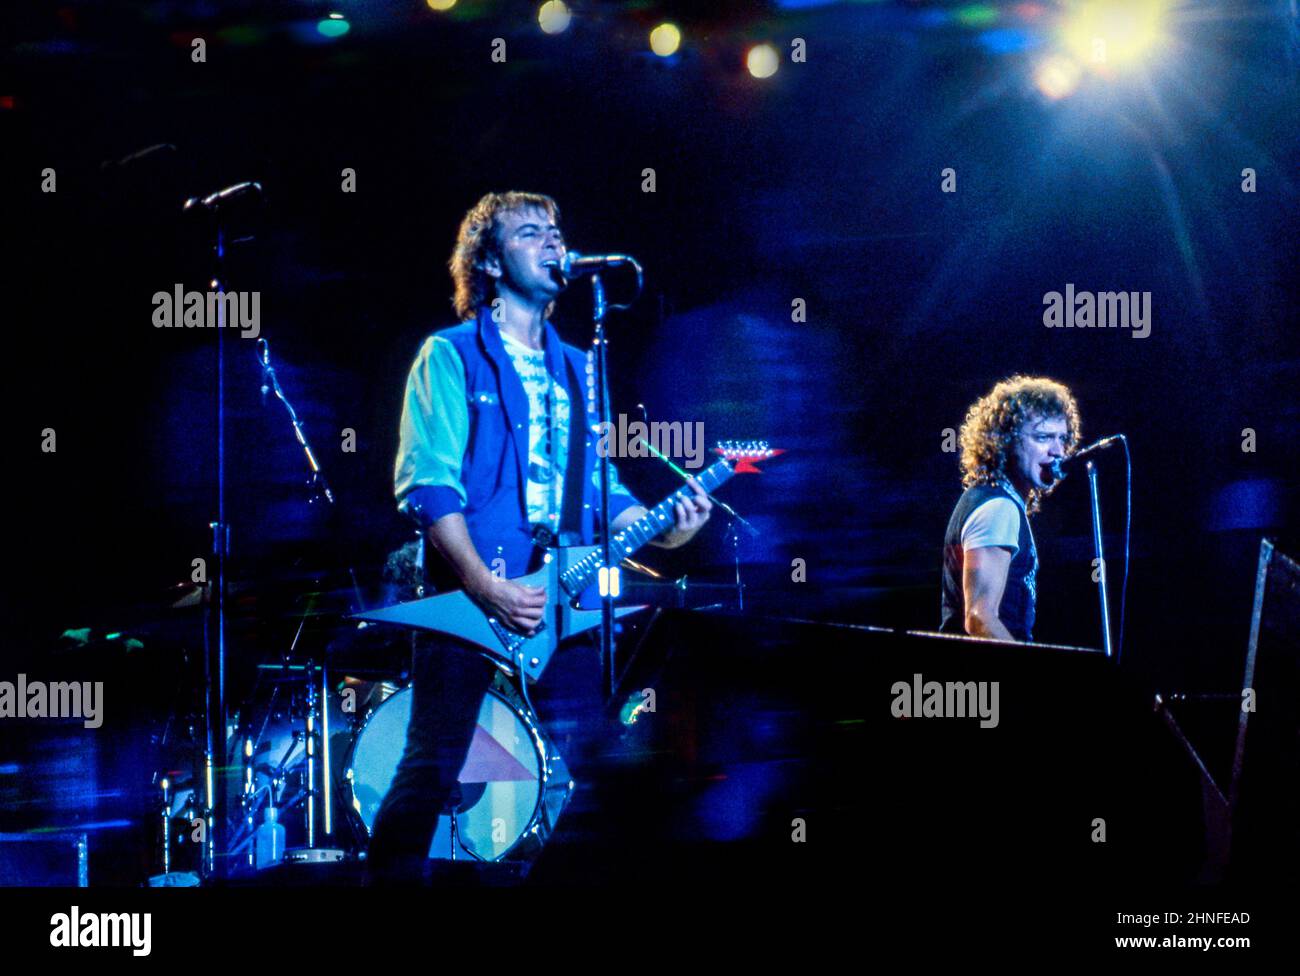 Guitarist Mick Jones and singer Lou Gramm performing with of Anglo-American band Foreigner at Wembley Arena, London in 1982. Stock Photo